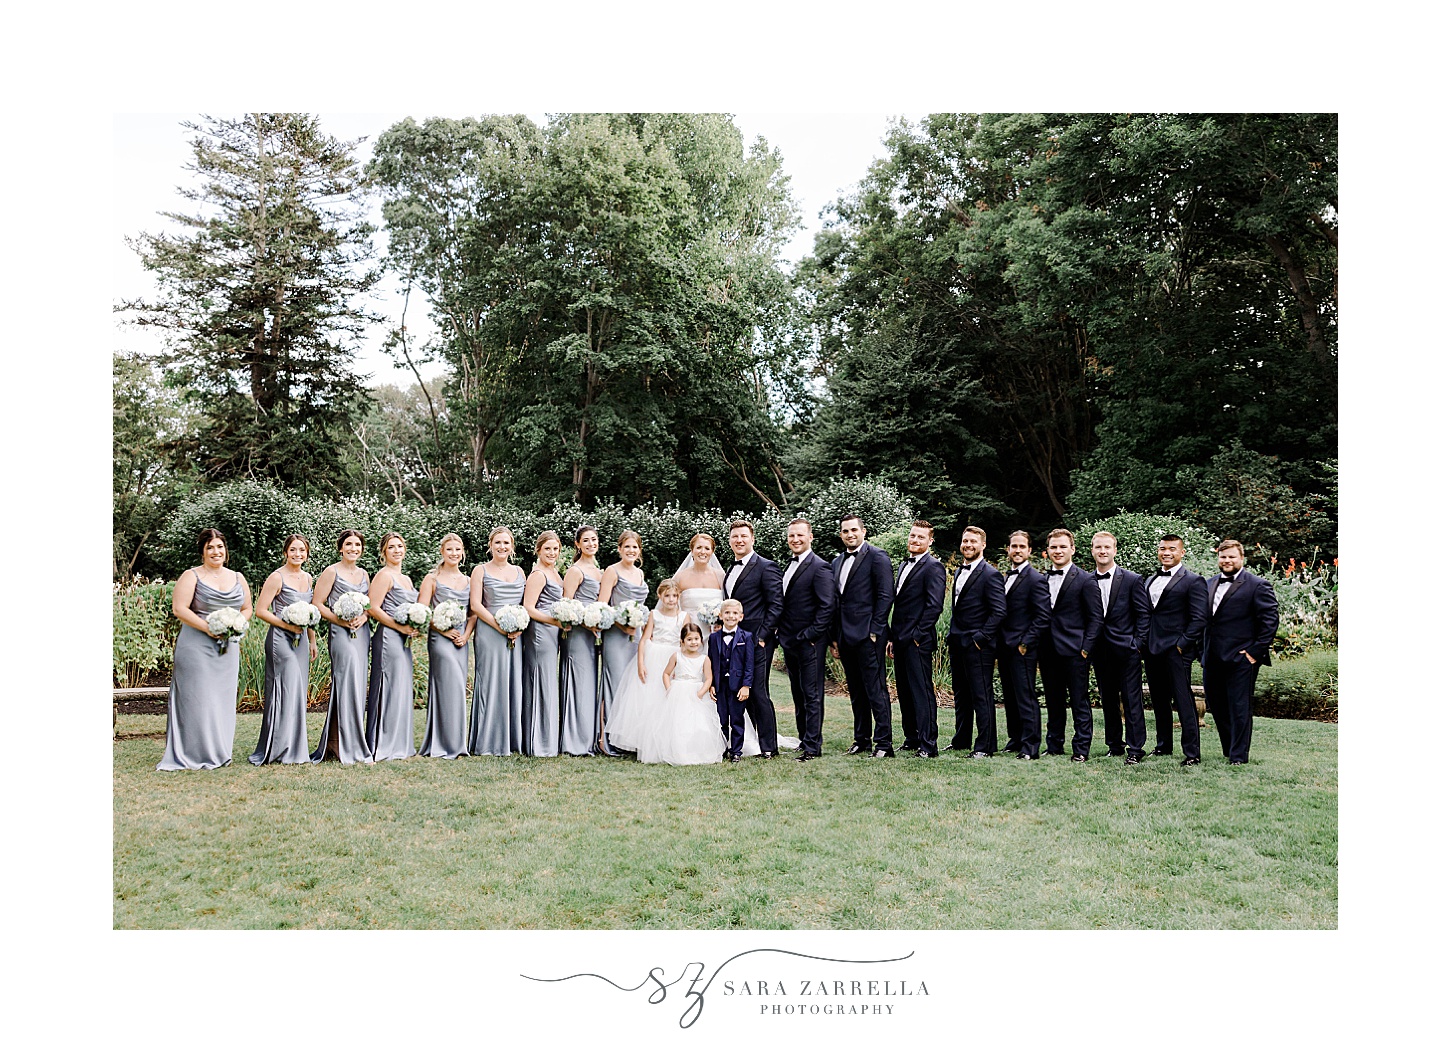 newlyweds pose with wedding party in blue dresses and navy suits